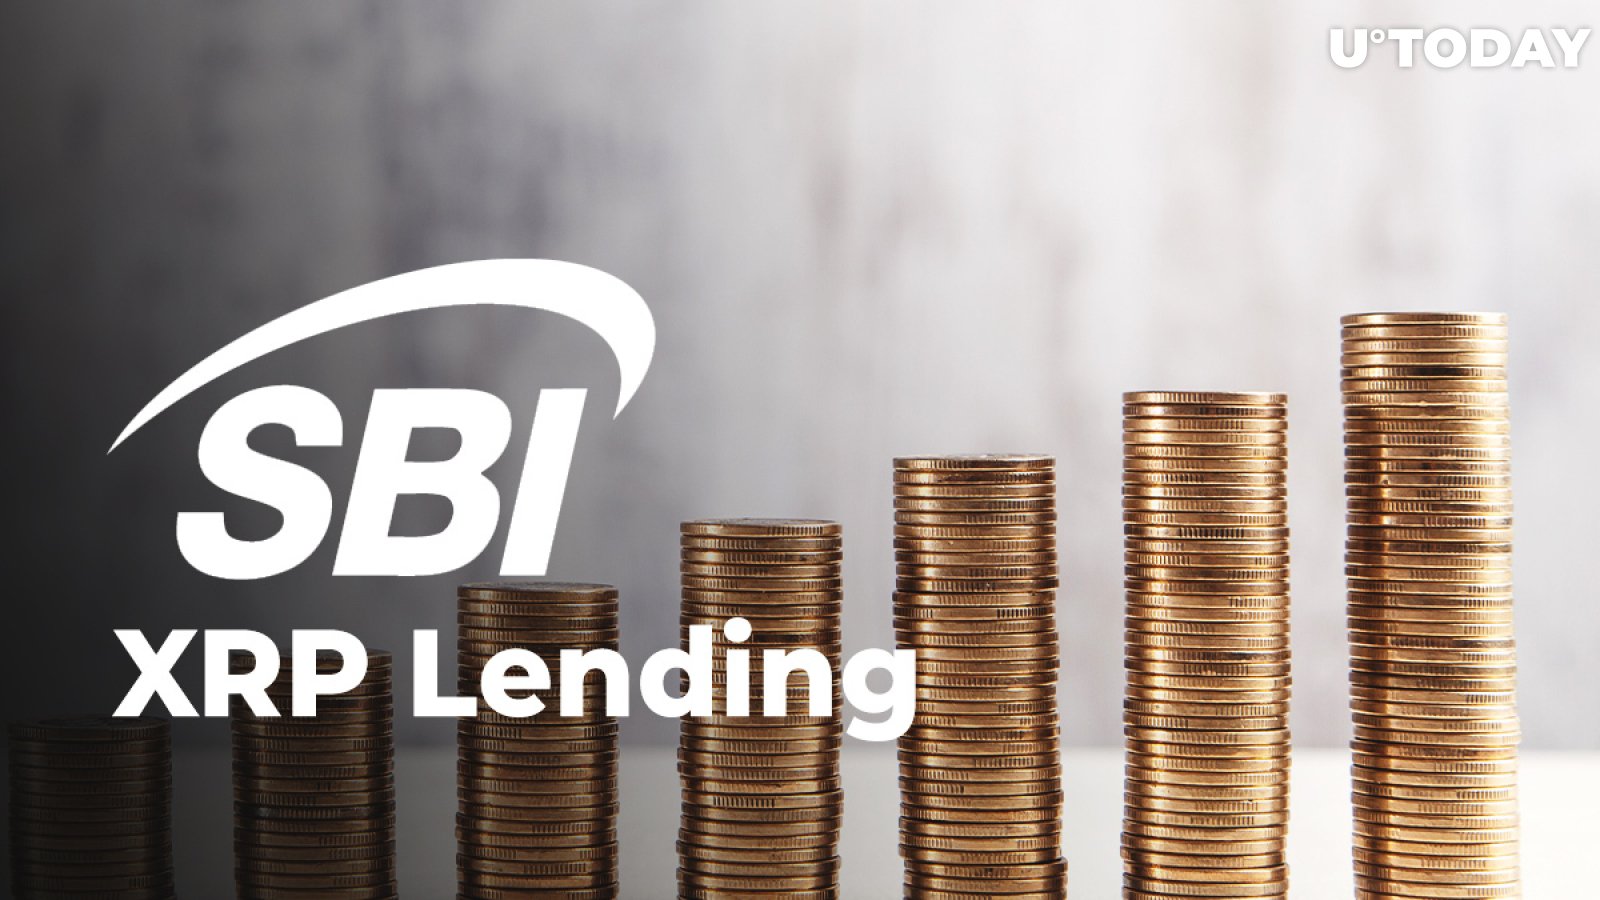 Japanese Financial Giant SBI Group Introduces XRP Lending